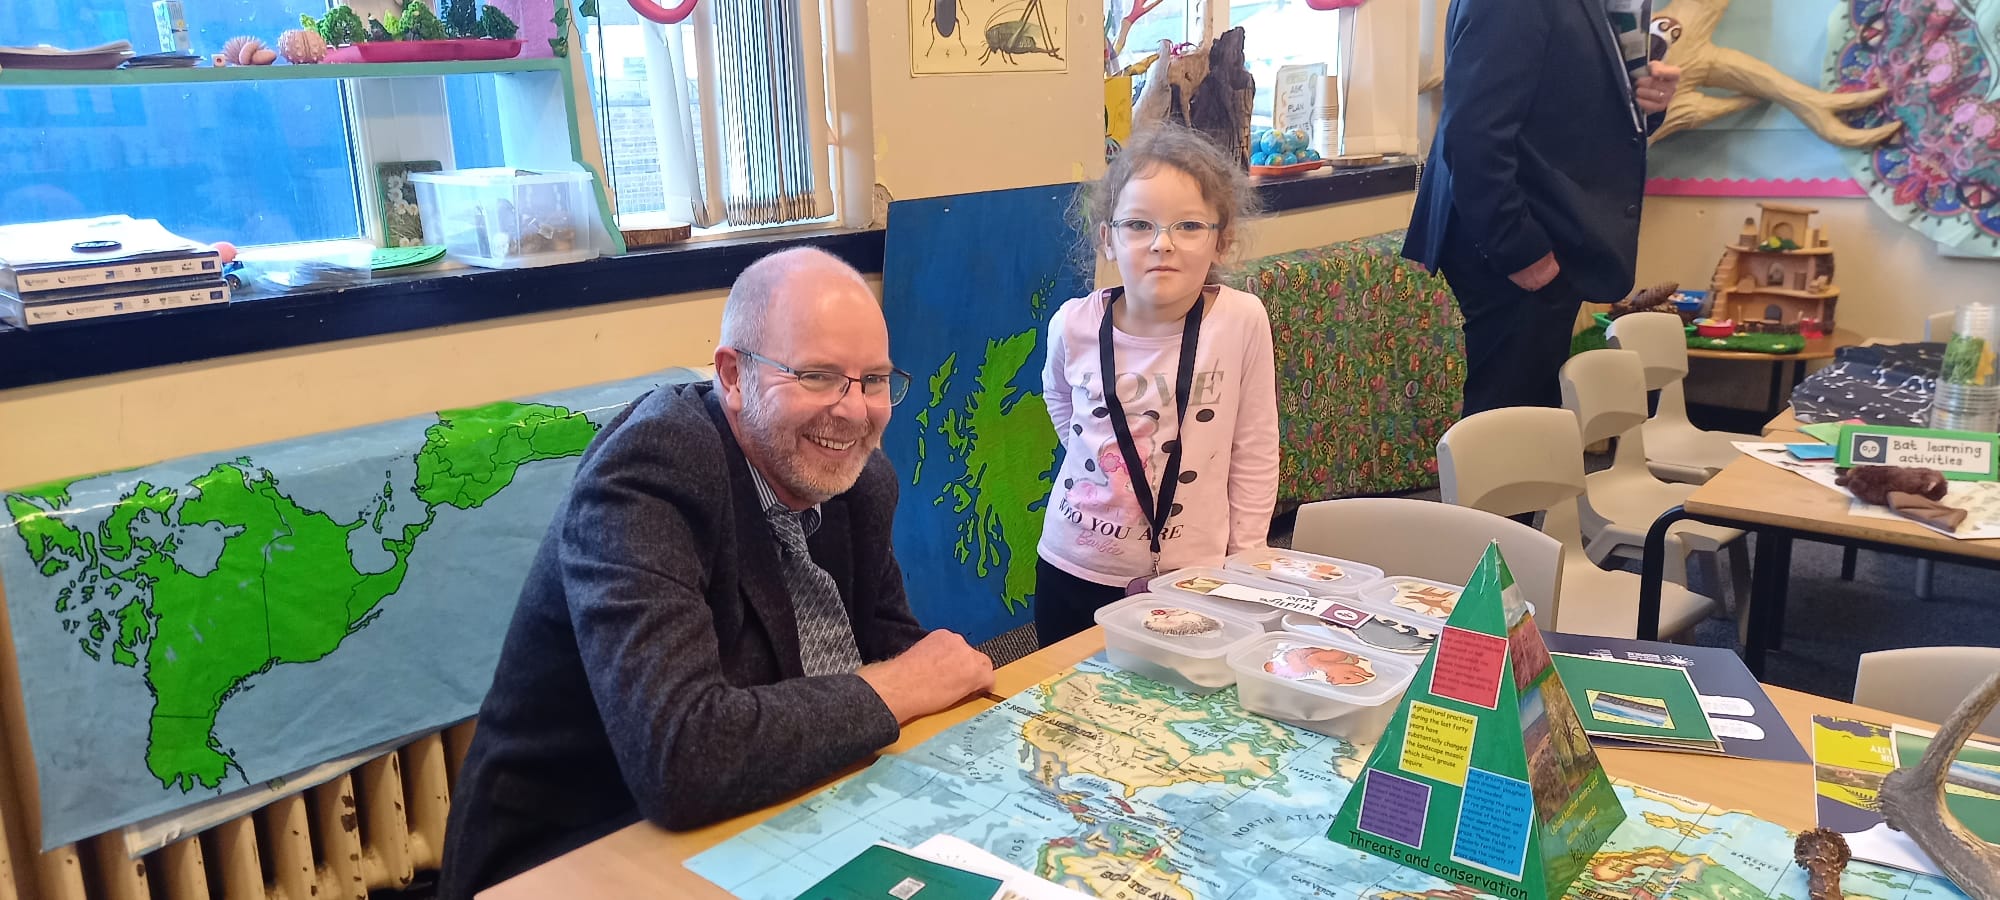 Molly, a pupil at Girvan Primary School, shows the Galloway and Southern Ayrshire Biosphere's Director, Ed Forrest, her nature-based learning projects